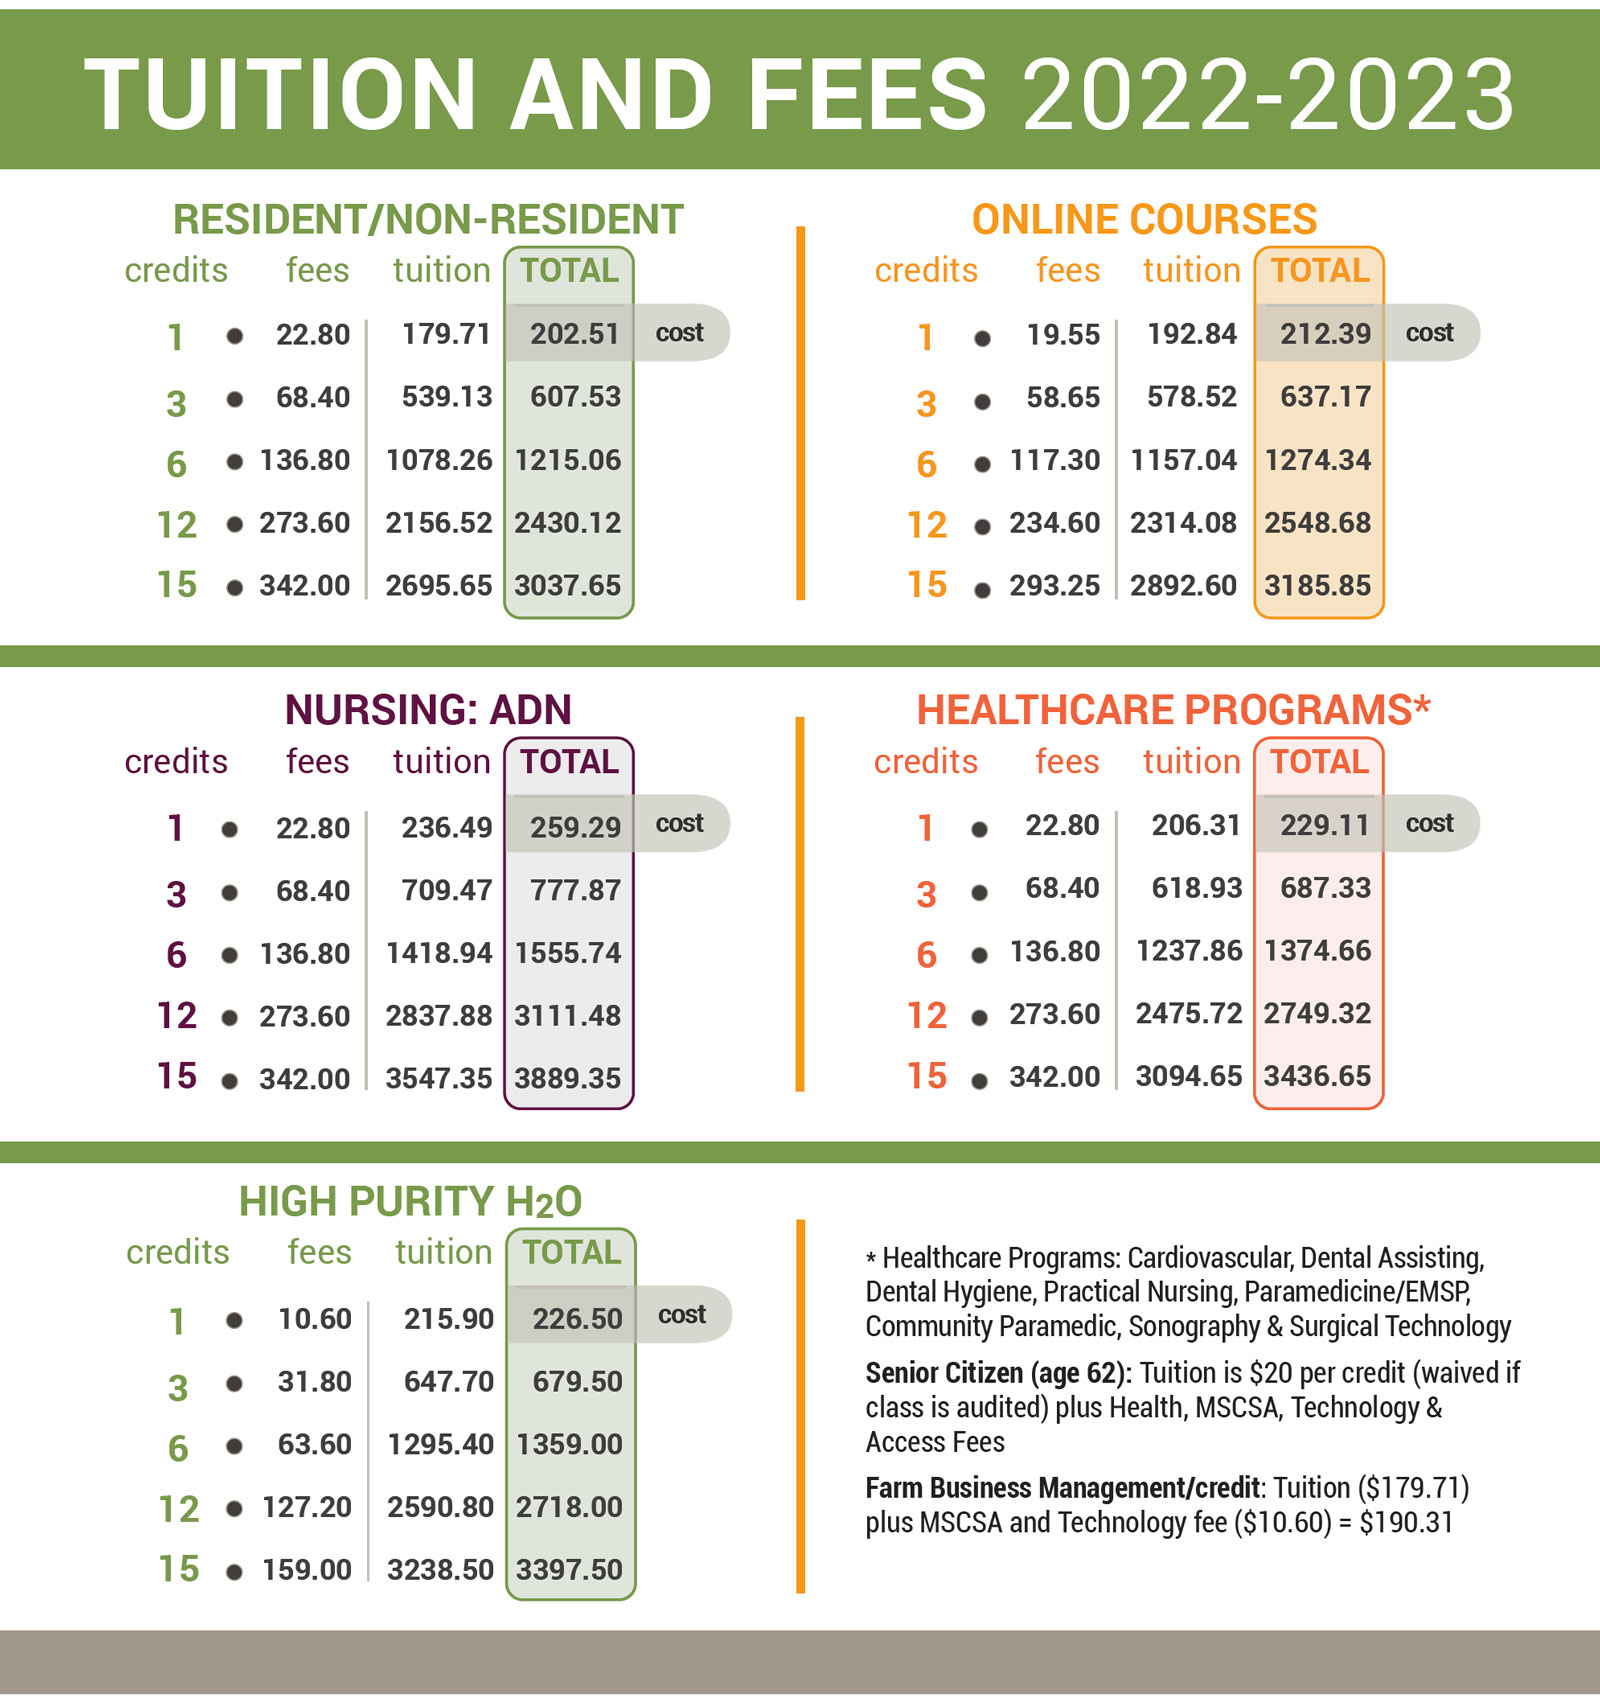 Tuition and Fees 2022-2023 info